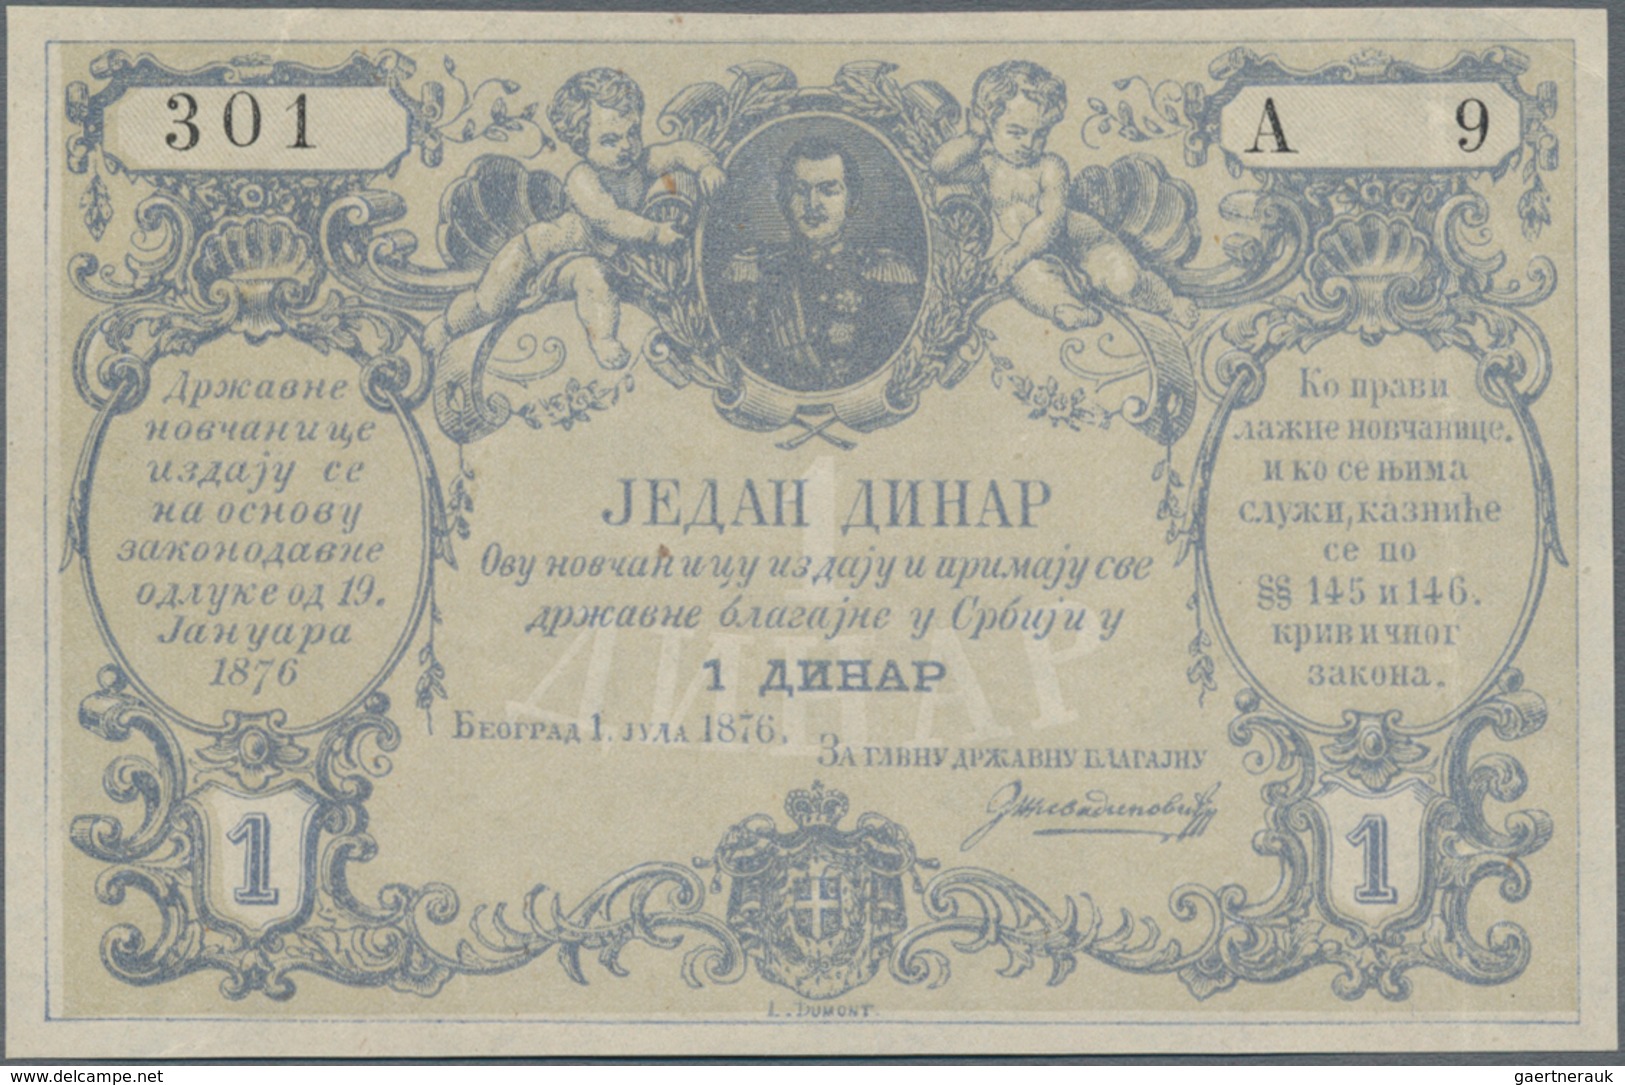 Serbia / Serbien: Kingdom Of Serbia 1 Dinar 1876, P.1, Highly Rare Banknote In Excellent Condition, - Serbia